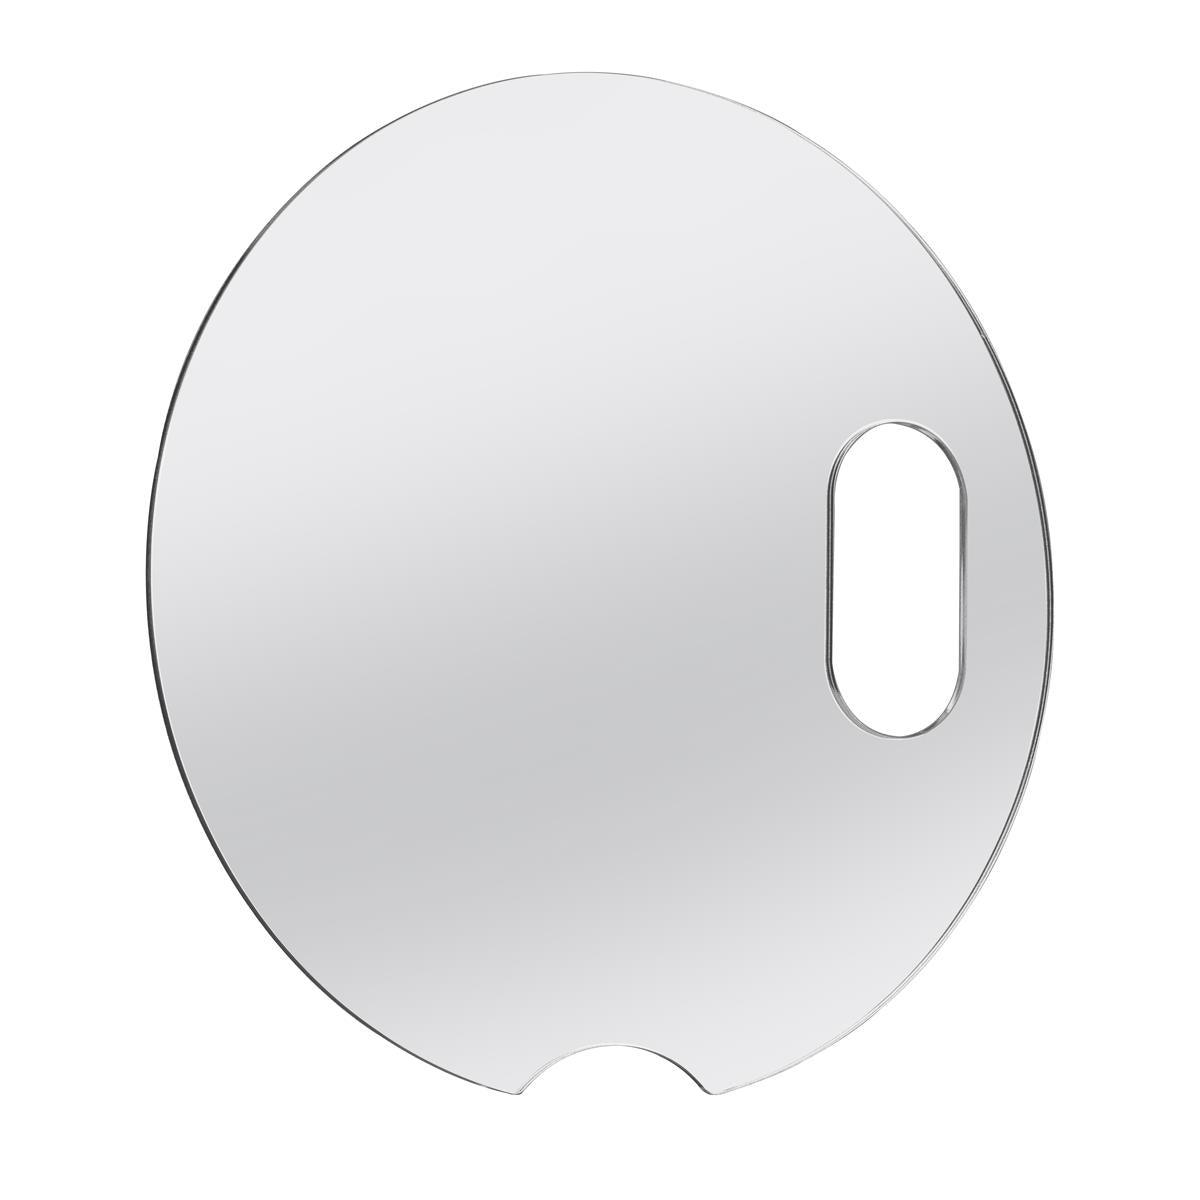 ring light mirror with peek a boo slot